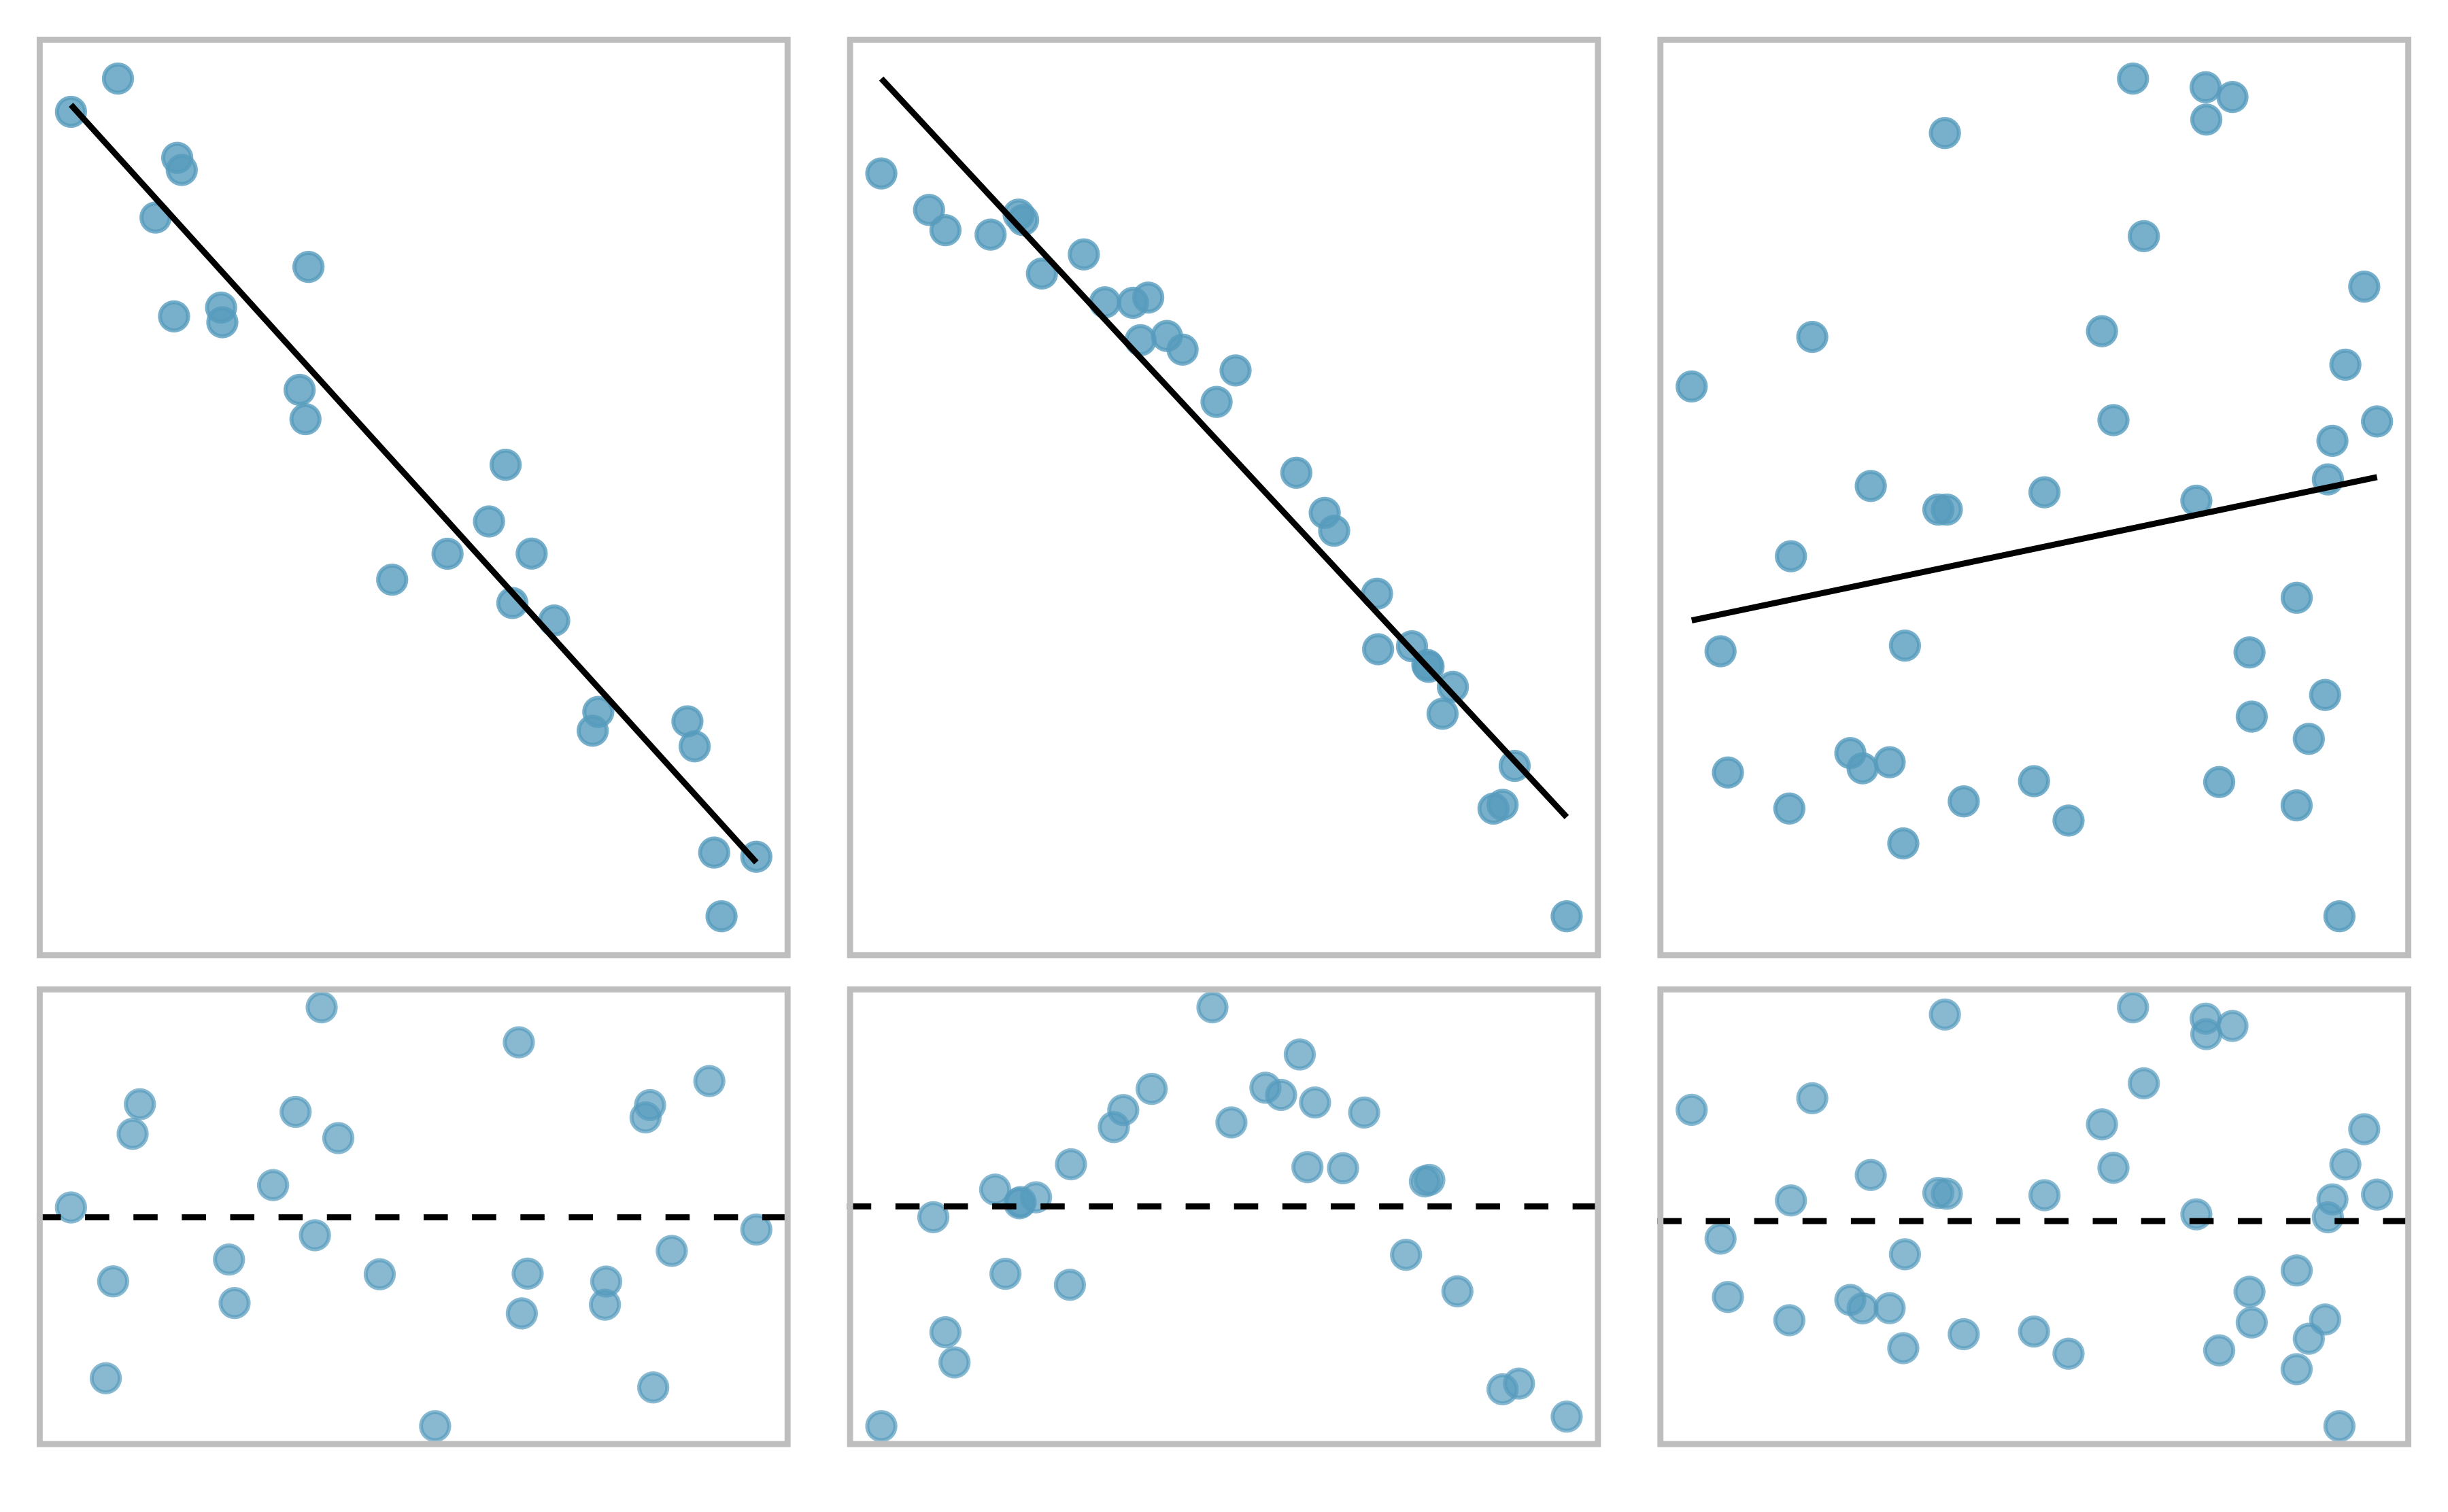 Sample data with their best fitting lines (top row) and their corresponding residual plots (bottom row).